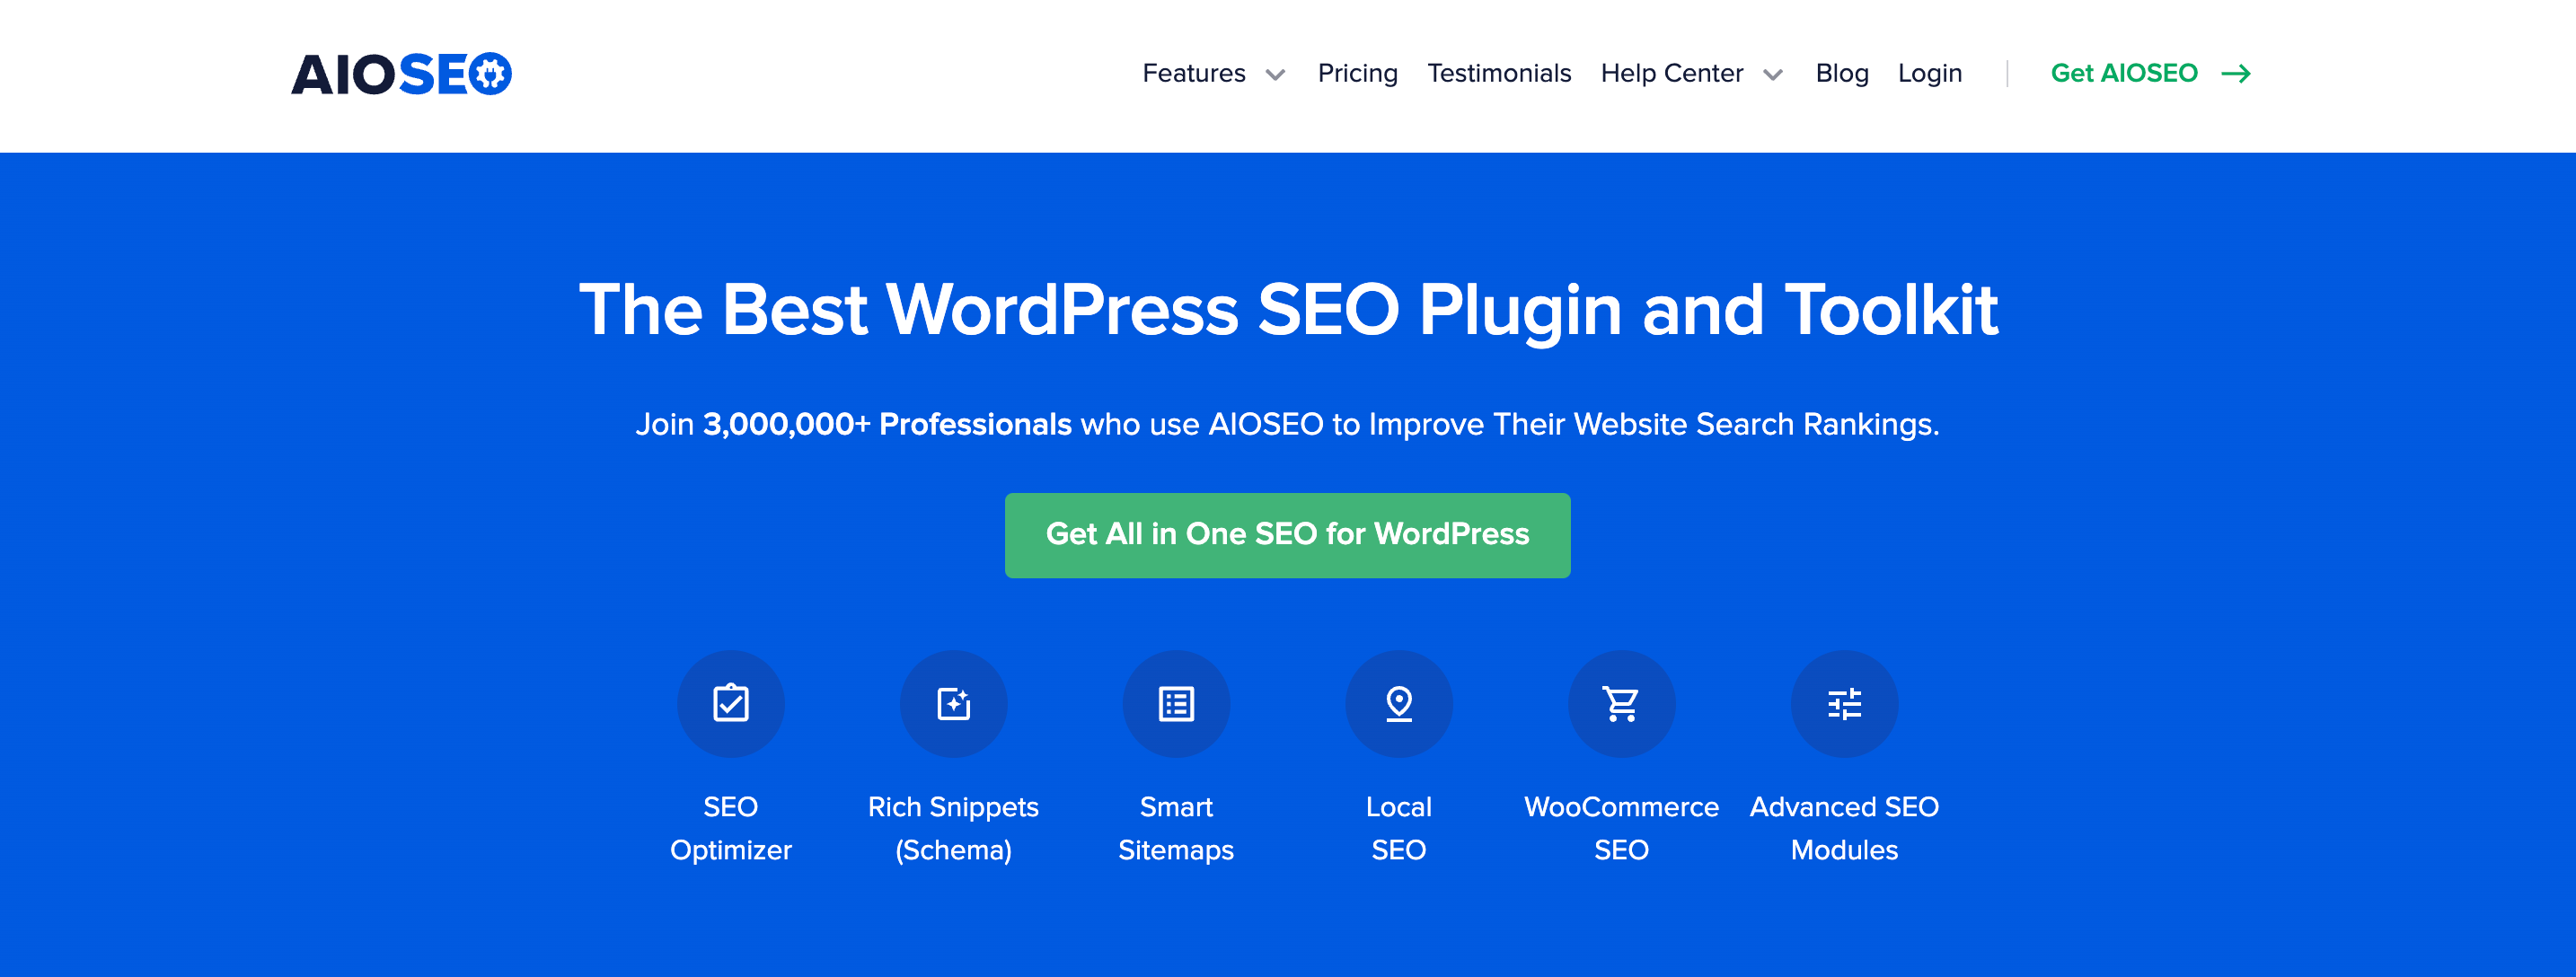 All in One SEO claims itself to be the best WordPress Plugin for SEO.